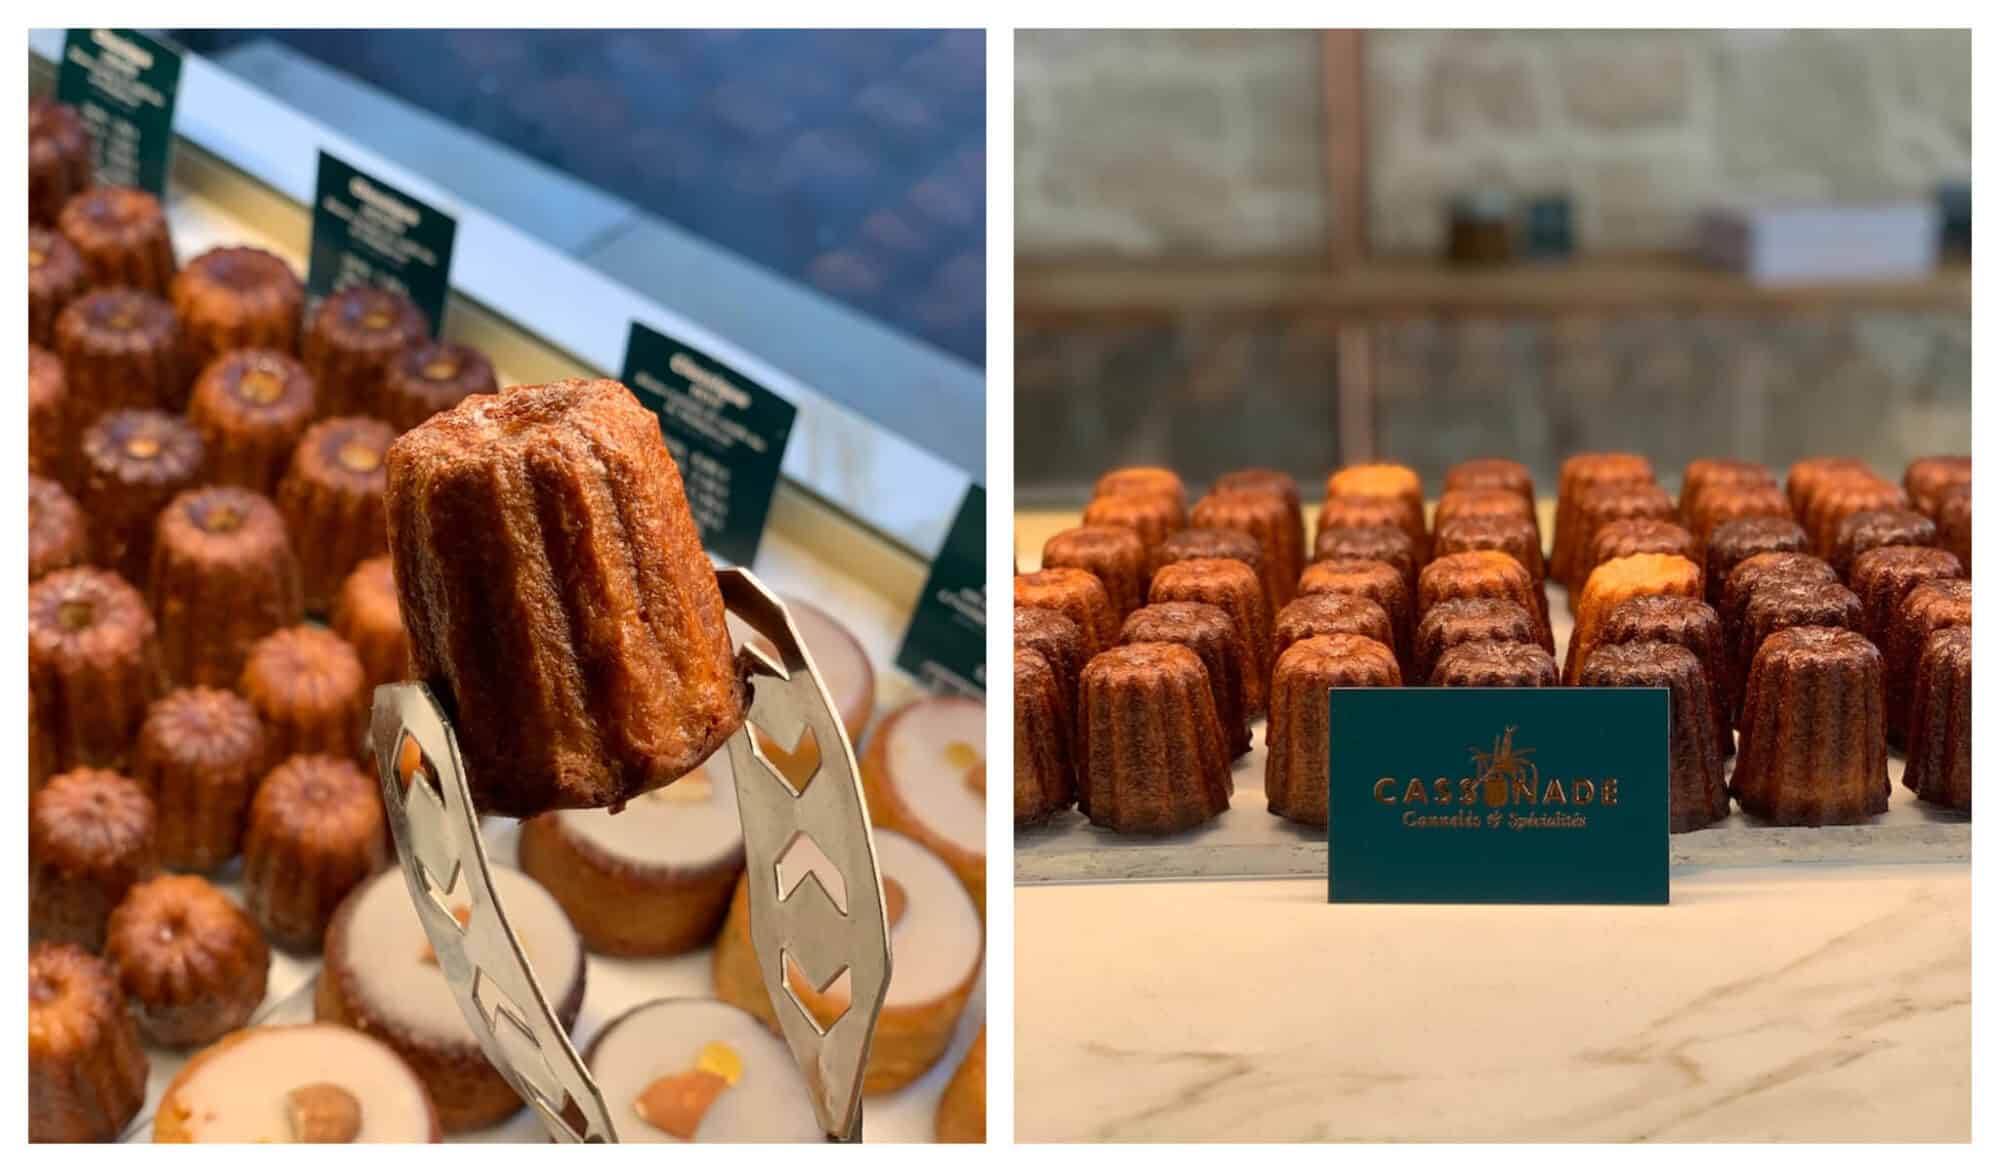 Left: A pair of tongs displays a canele, Bordeaux's iconic pastry with dozens more lined up in the background. Right: Caneles are lined up behind a small green card with gold letters that reads "Cassonade", the name of the bakery in Bordeaux.